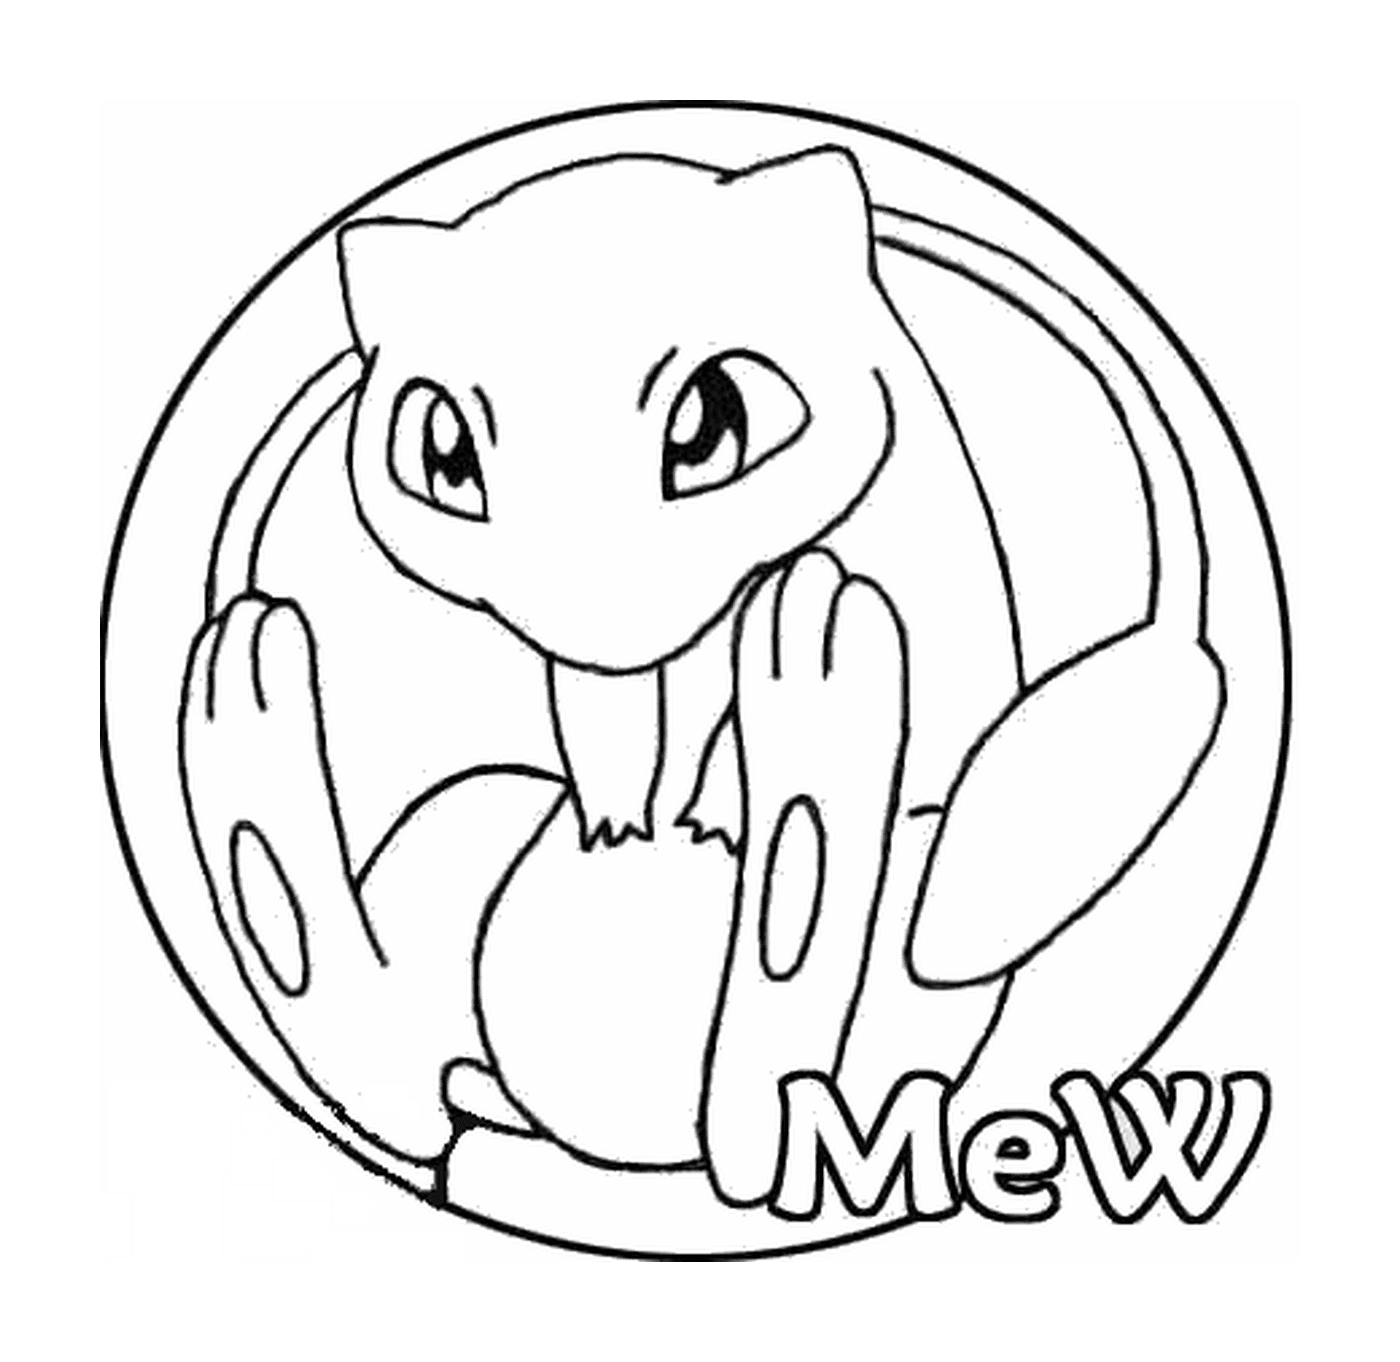  Legendary Mew: Mew in a circle 